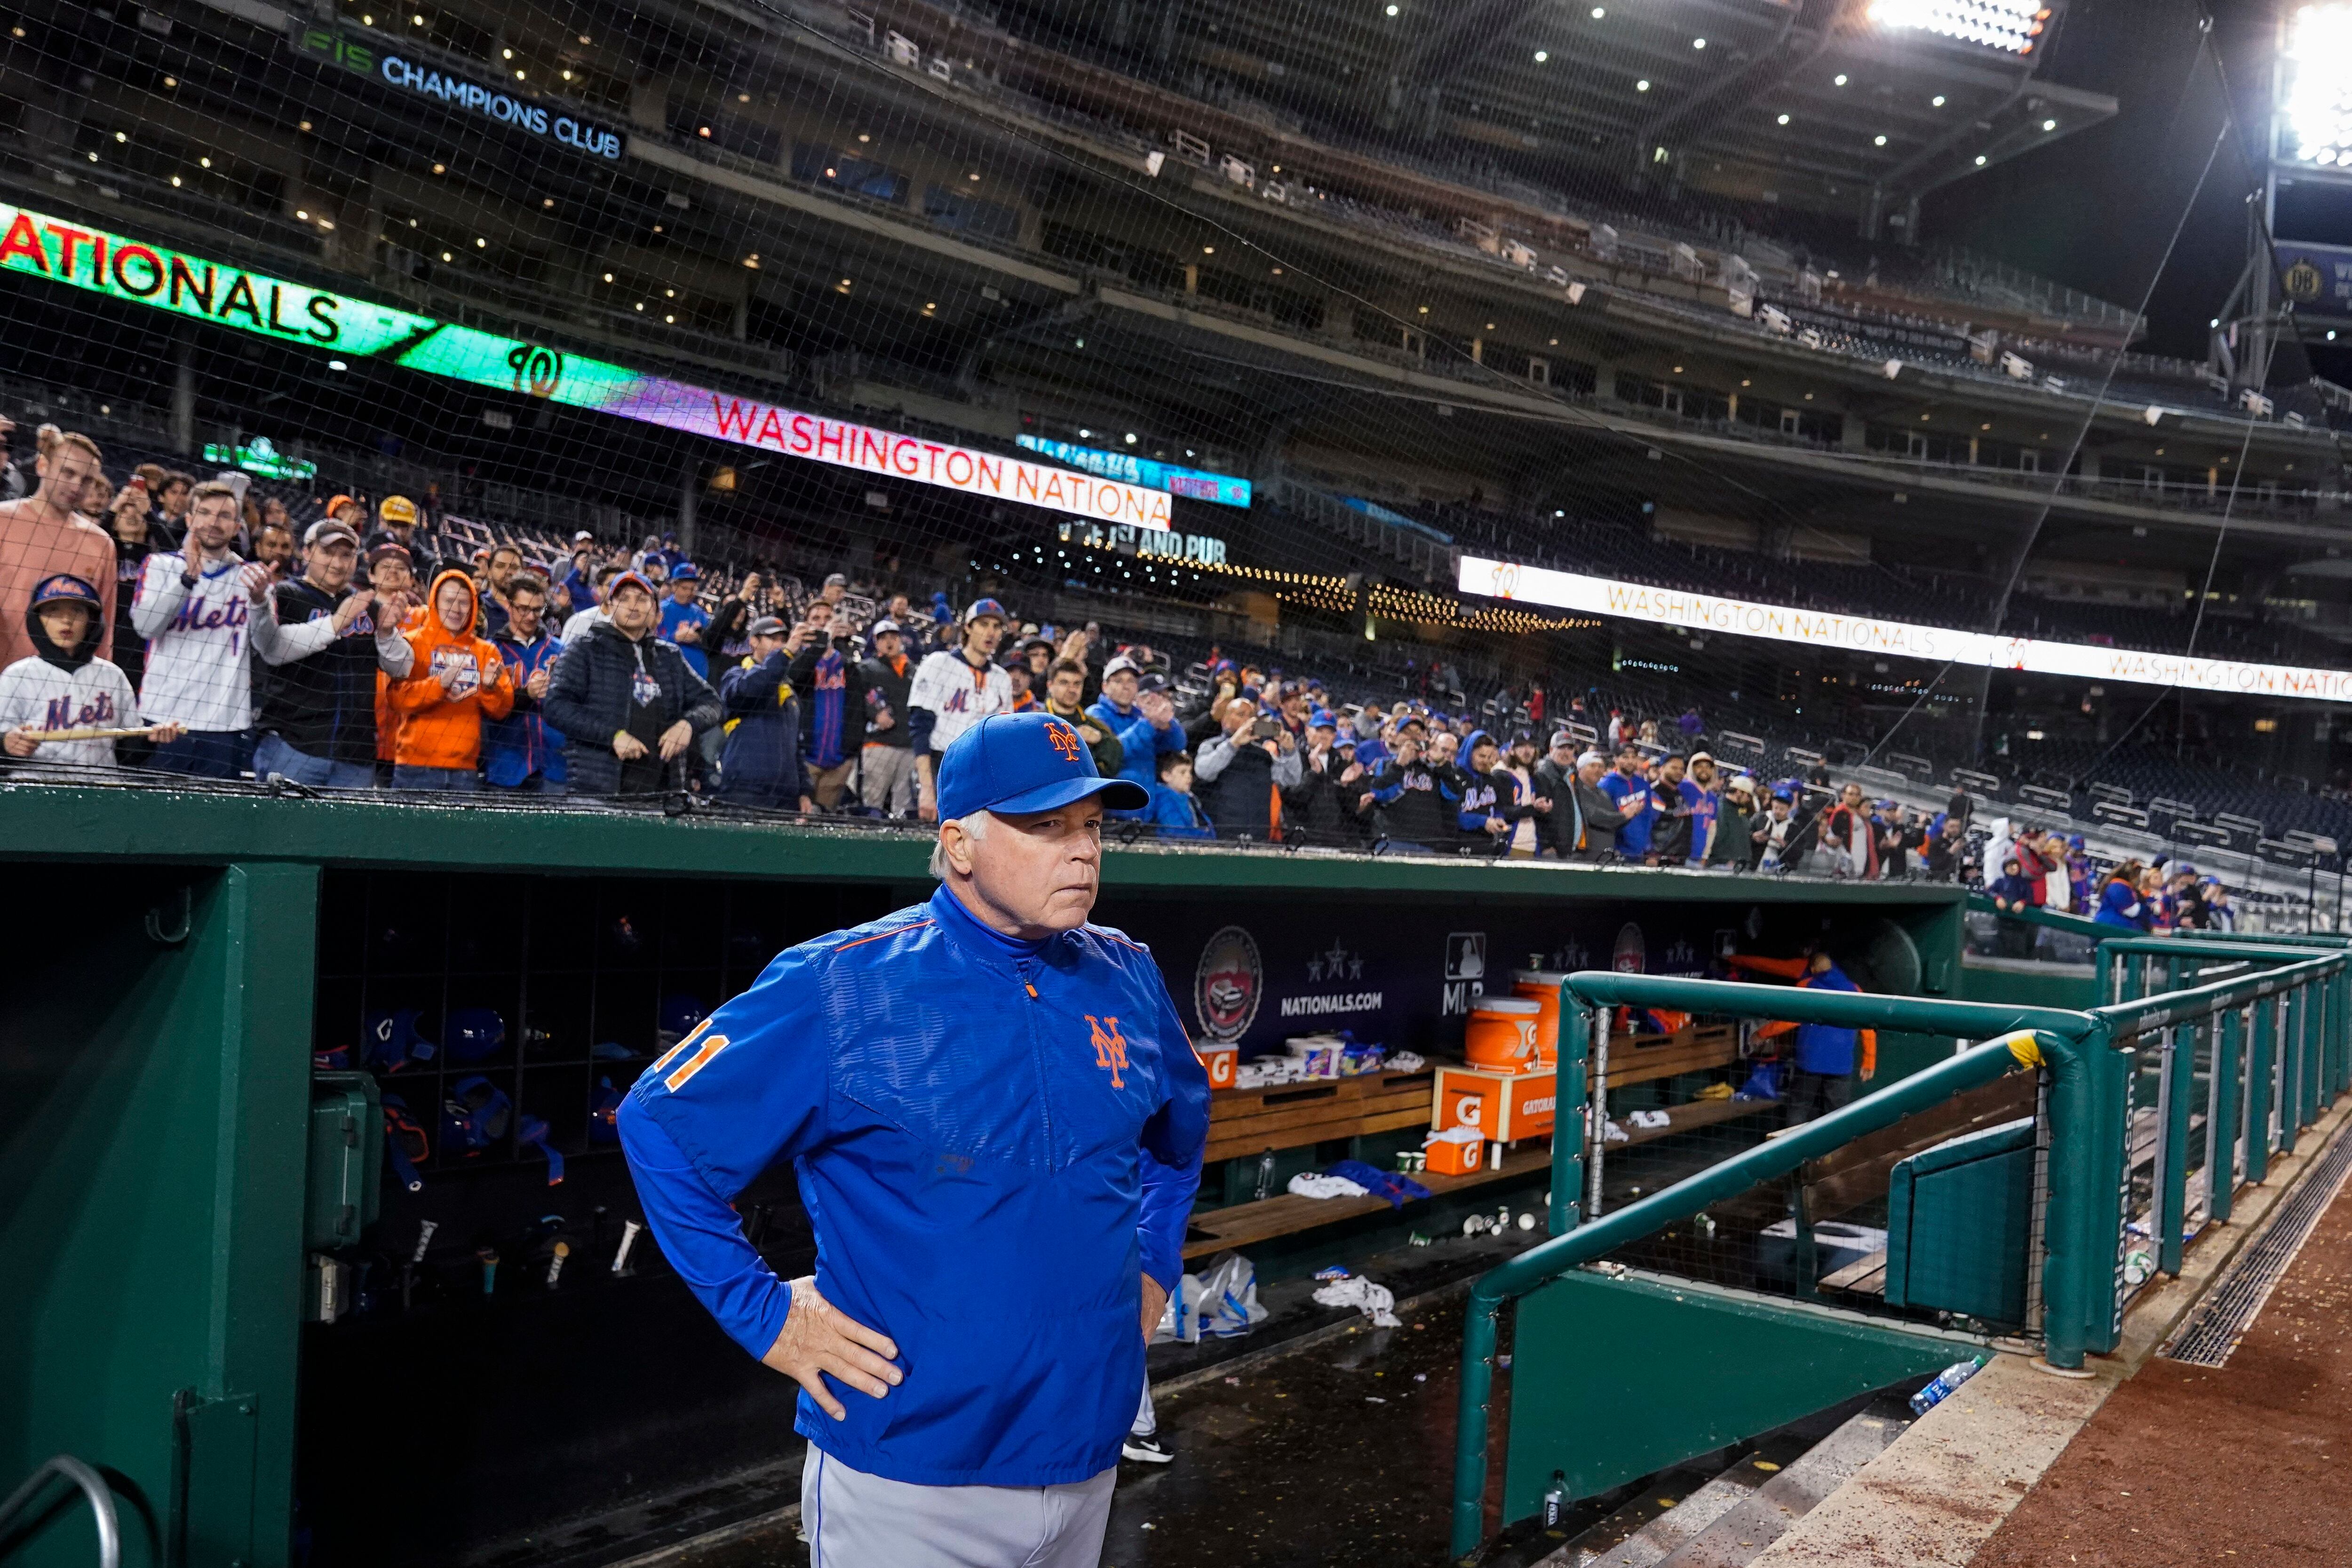 Mets manager Showalter suspended 1 game for reliever's pitch - The